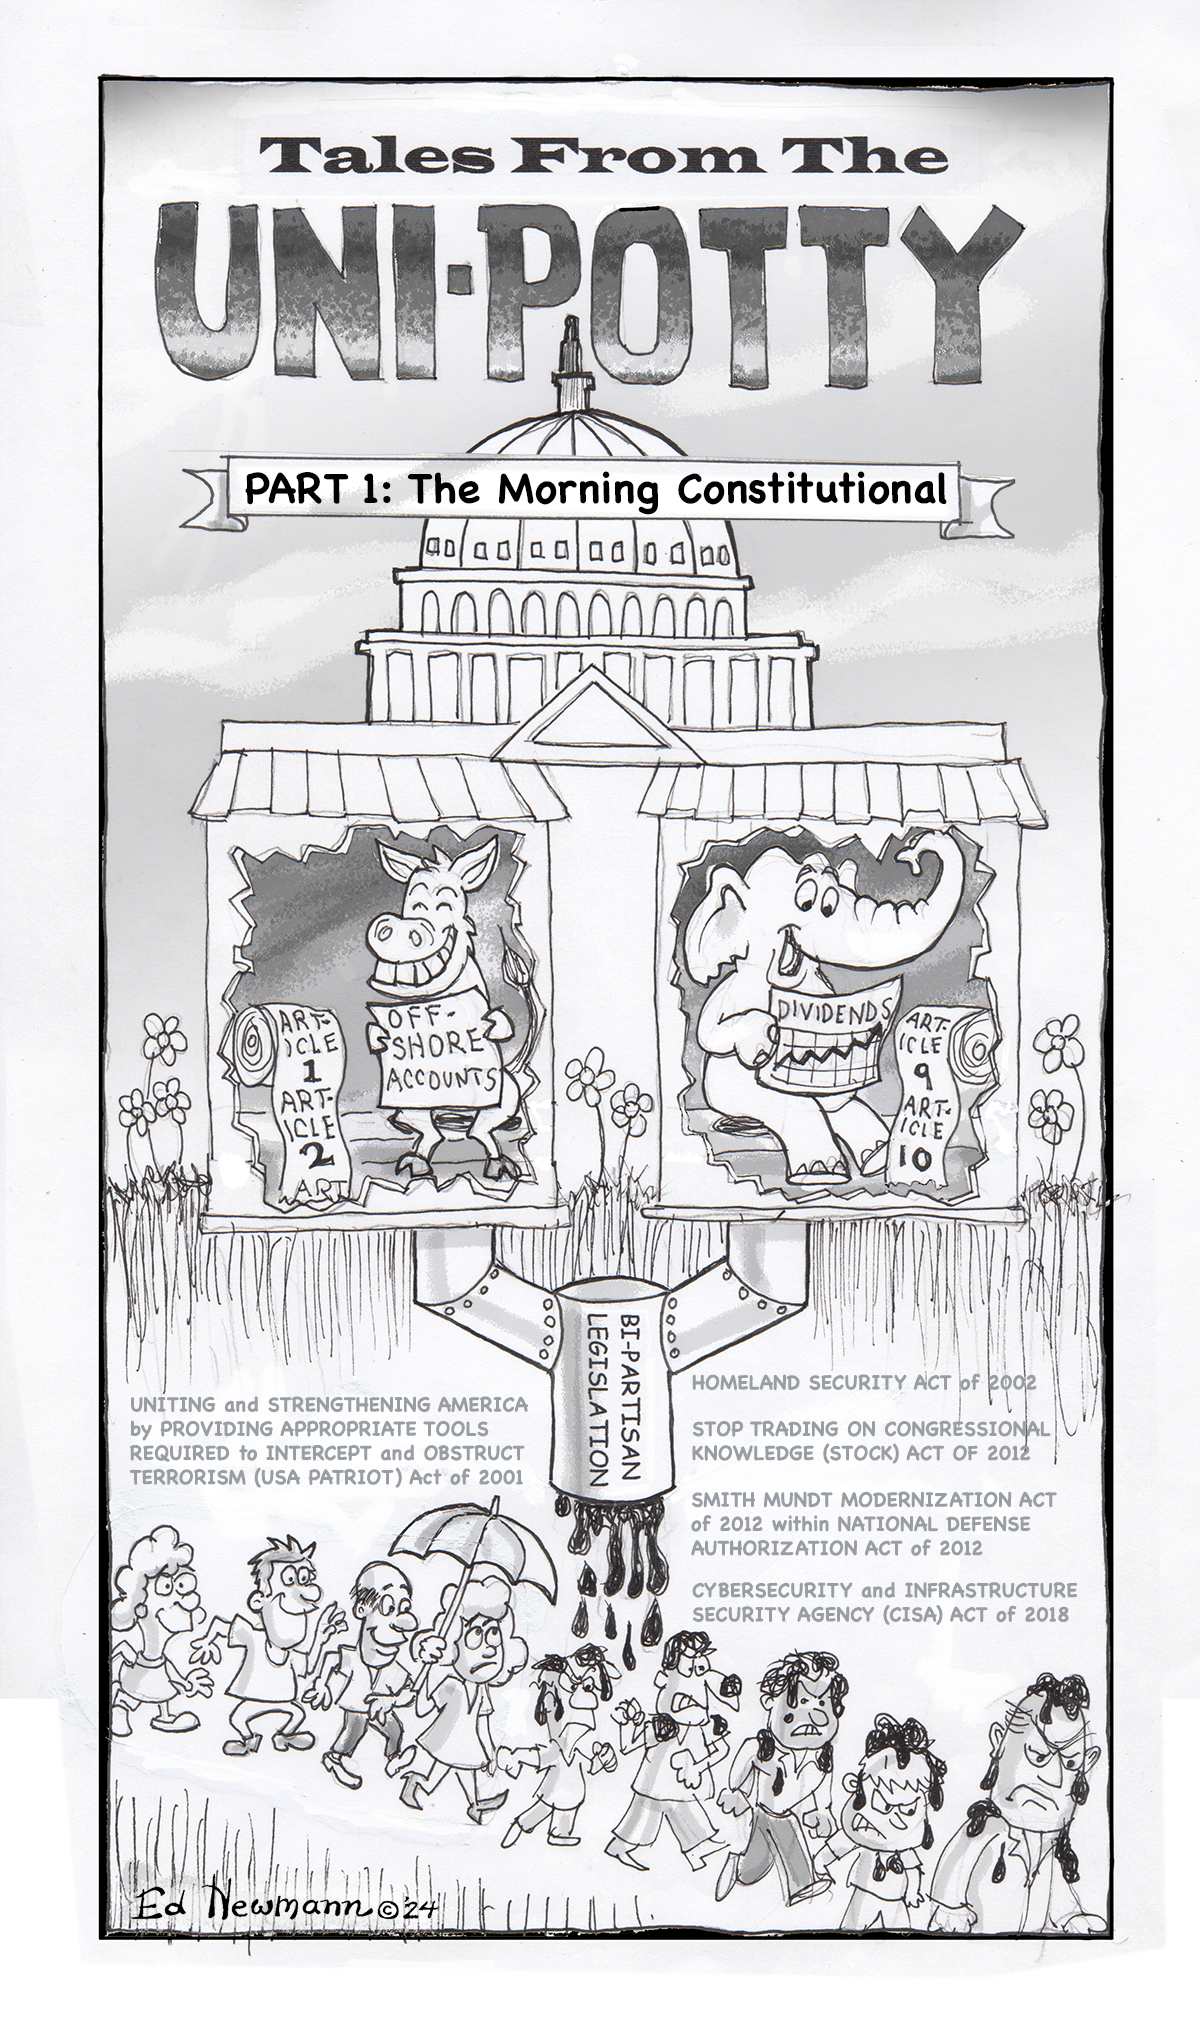 Tales from the Uni-Potty: The Morning Constitutional - Cartoon by Ed Newmann 